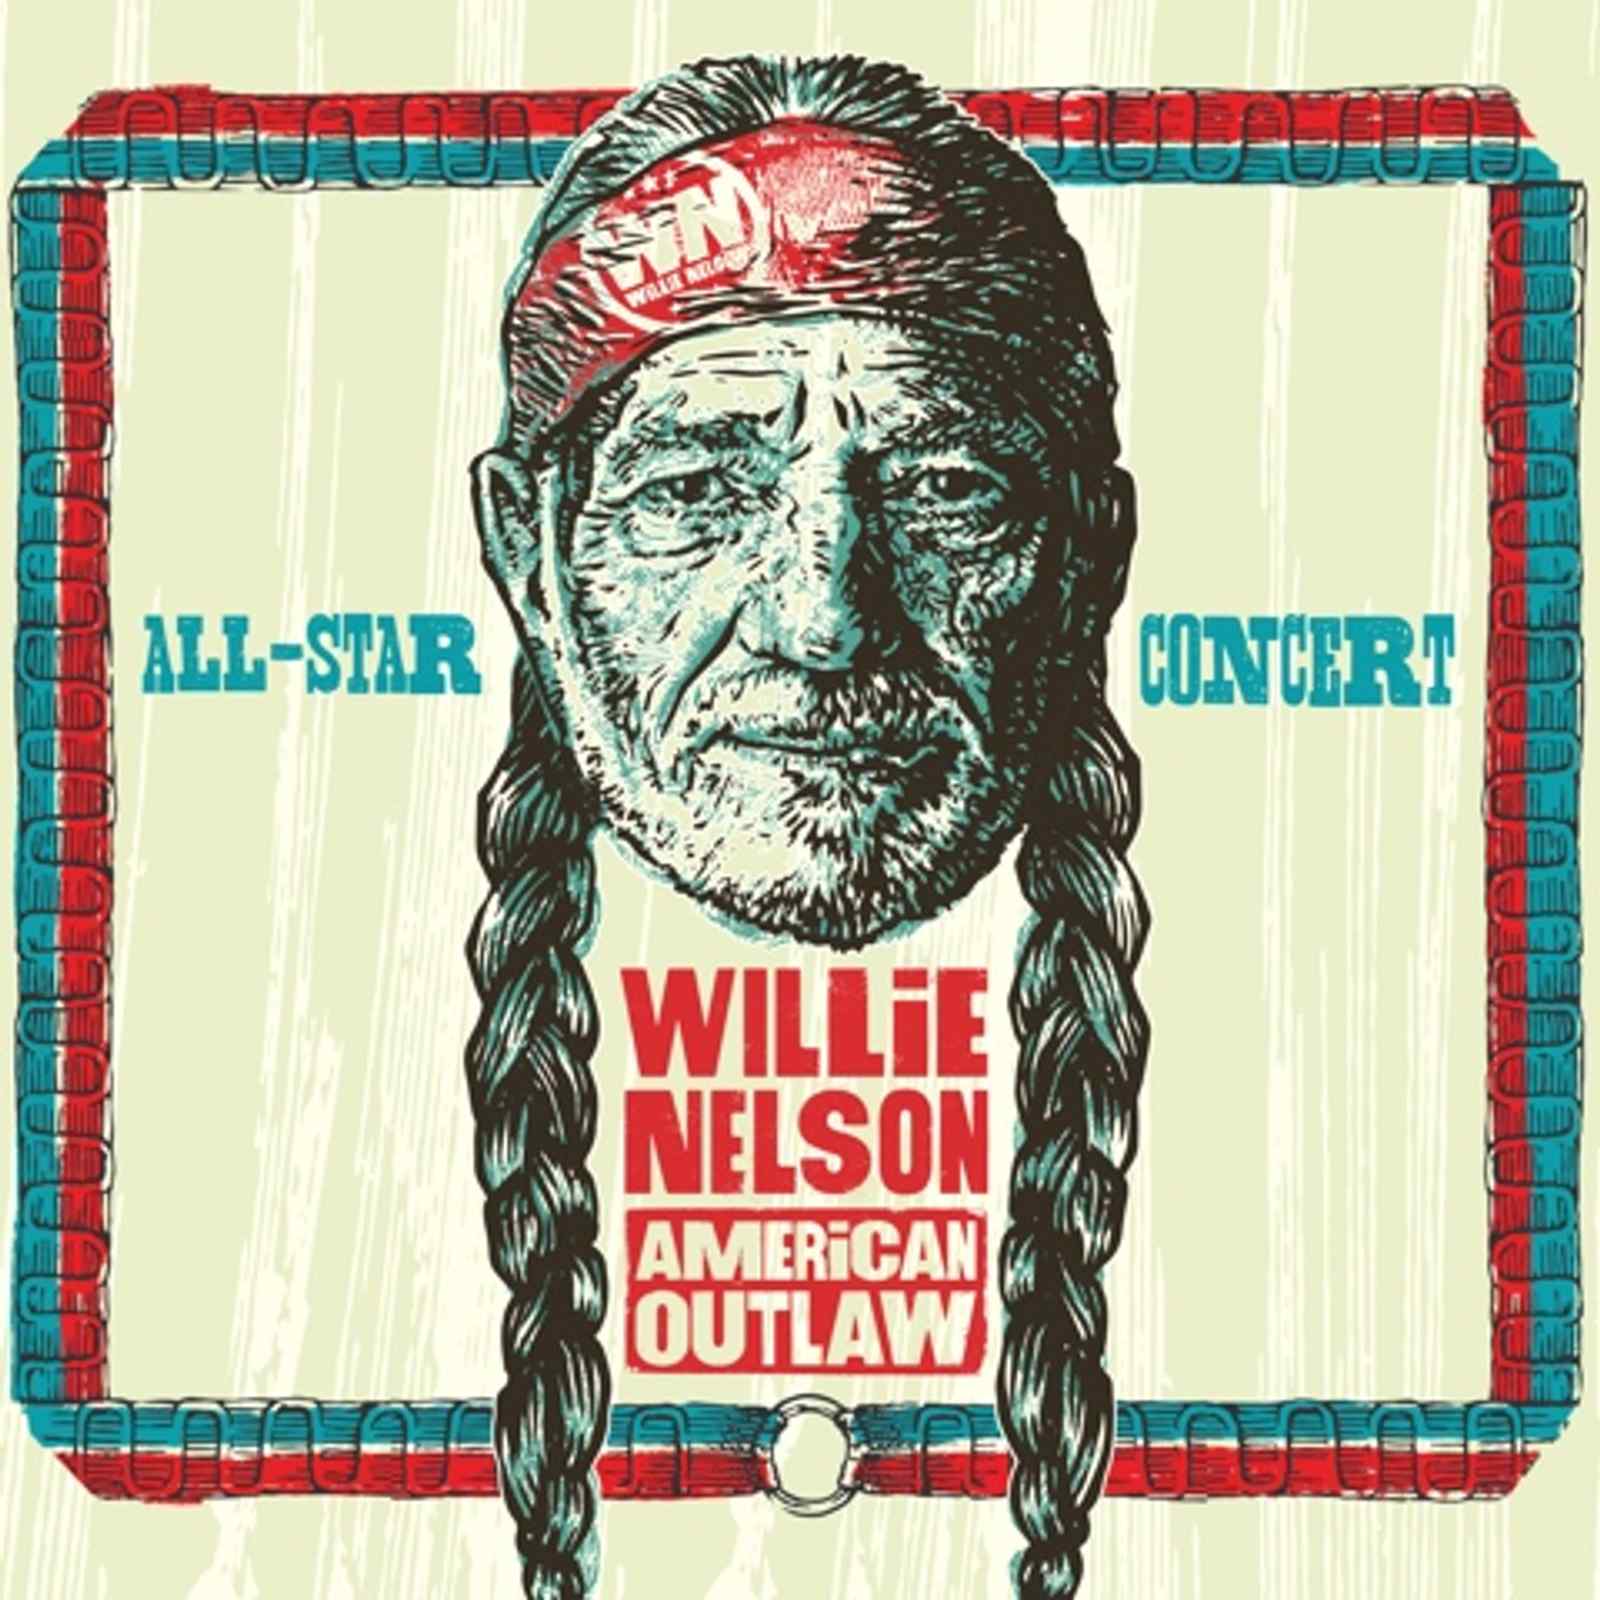 Willie Nelson American Outlaw CD and DVD